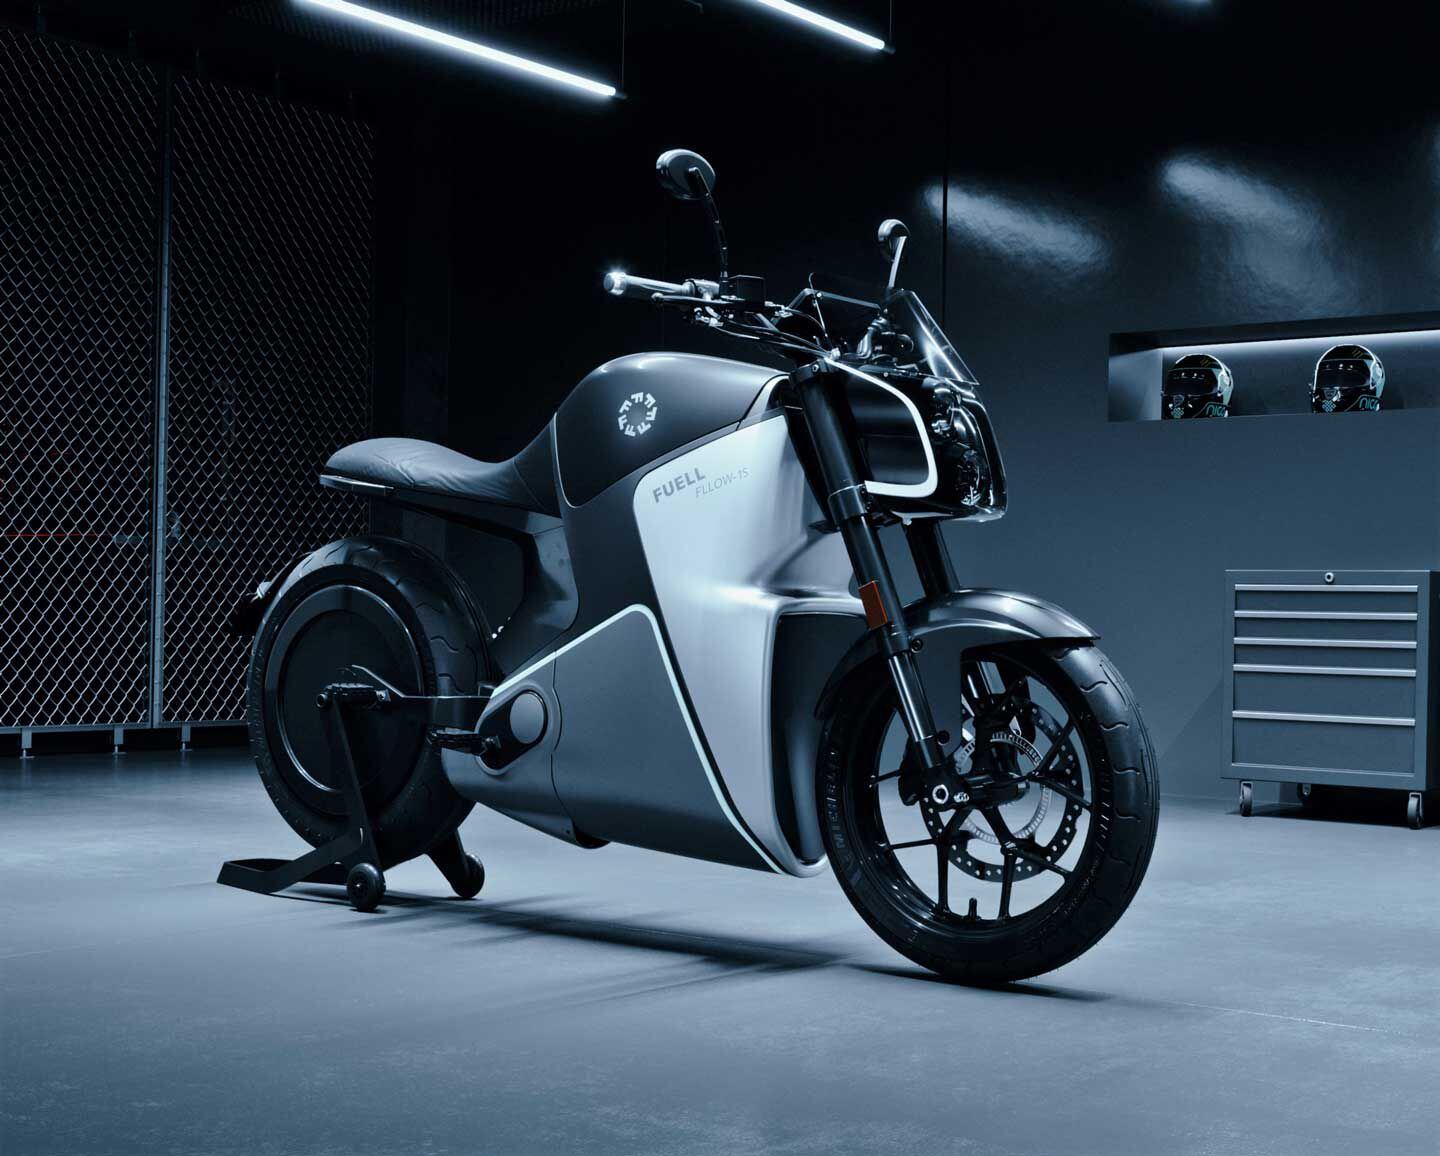 Time to order your Fuell Fllow electric motorcycle—it’s coming soon (we’re told).